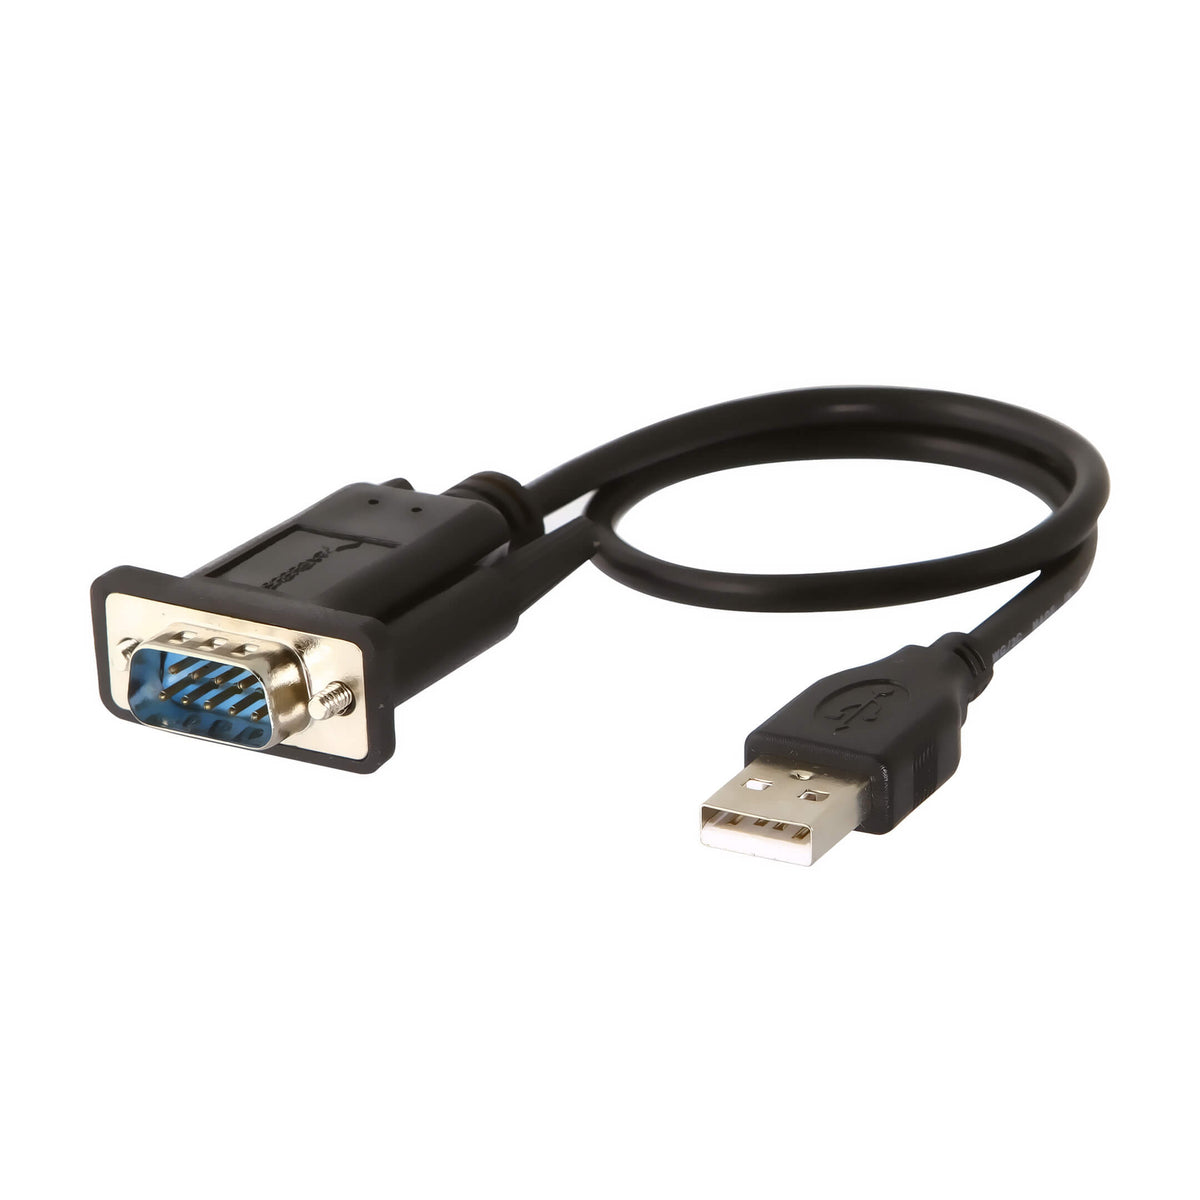 USB 2.0 To Serial Cable Adapter / USB A-Male; Serial 9-Pin Male With Thumbscrews Connectors